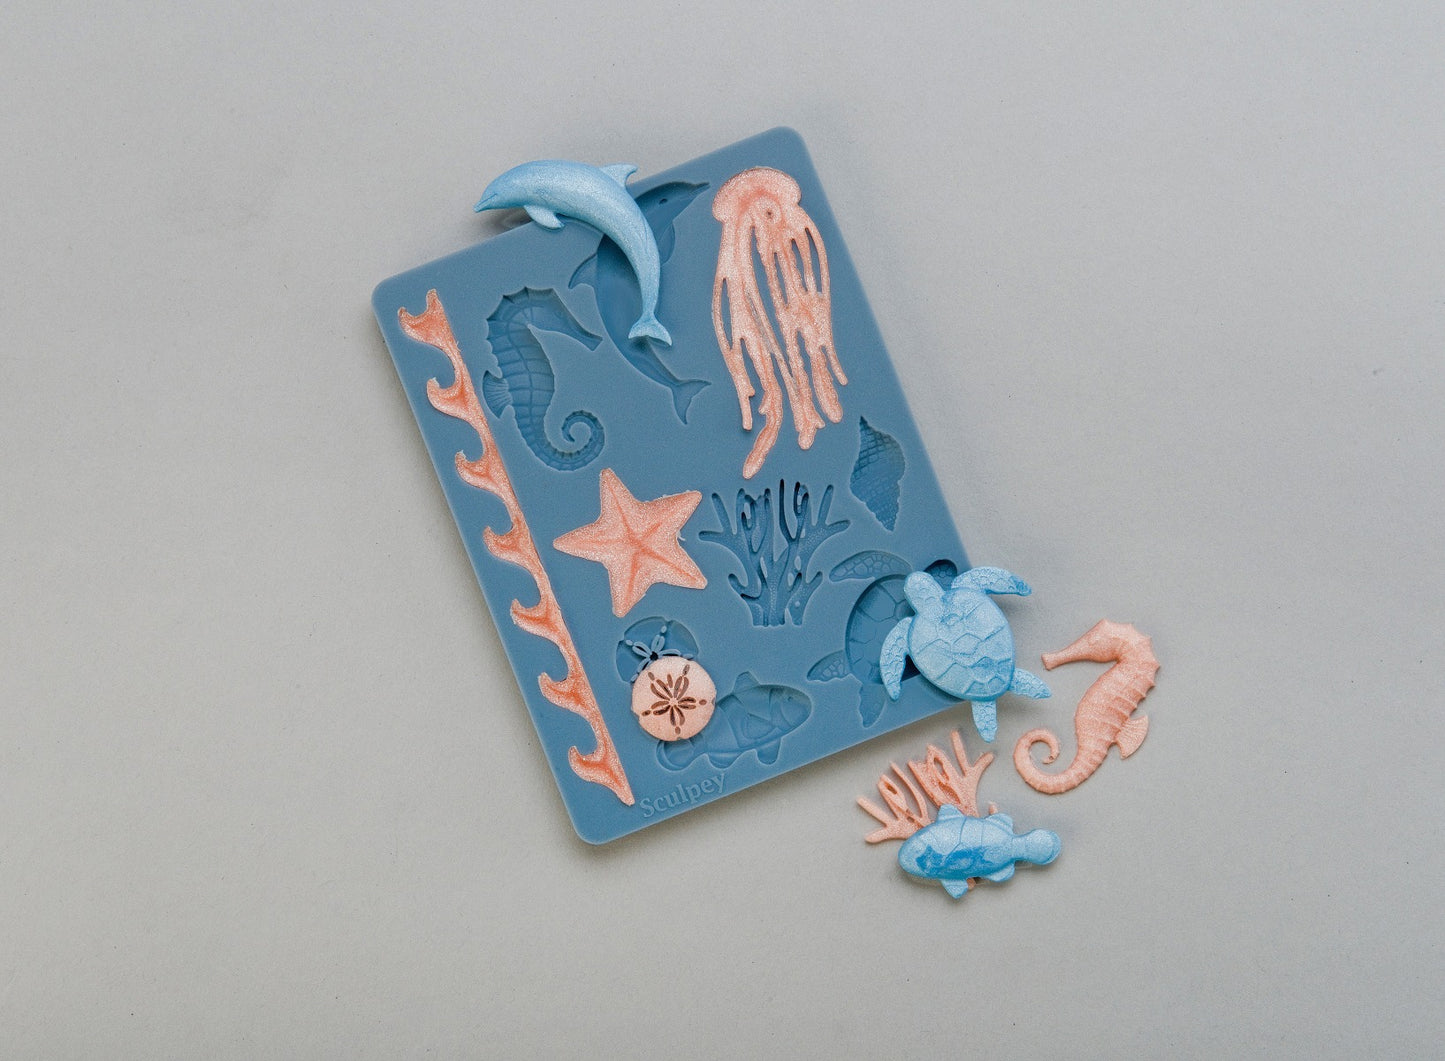 Sculpey Tools™ Oven-Safe Molds:  Sea Life